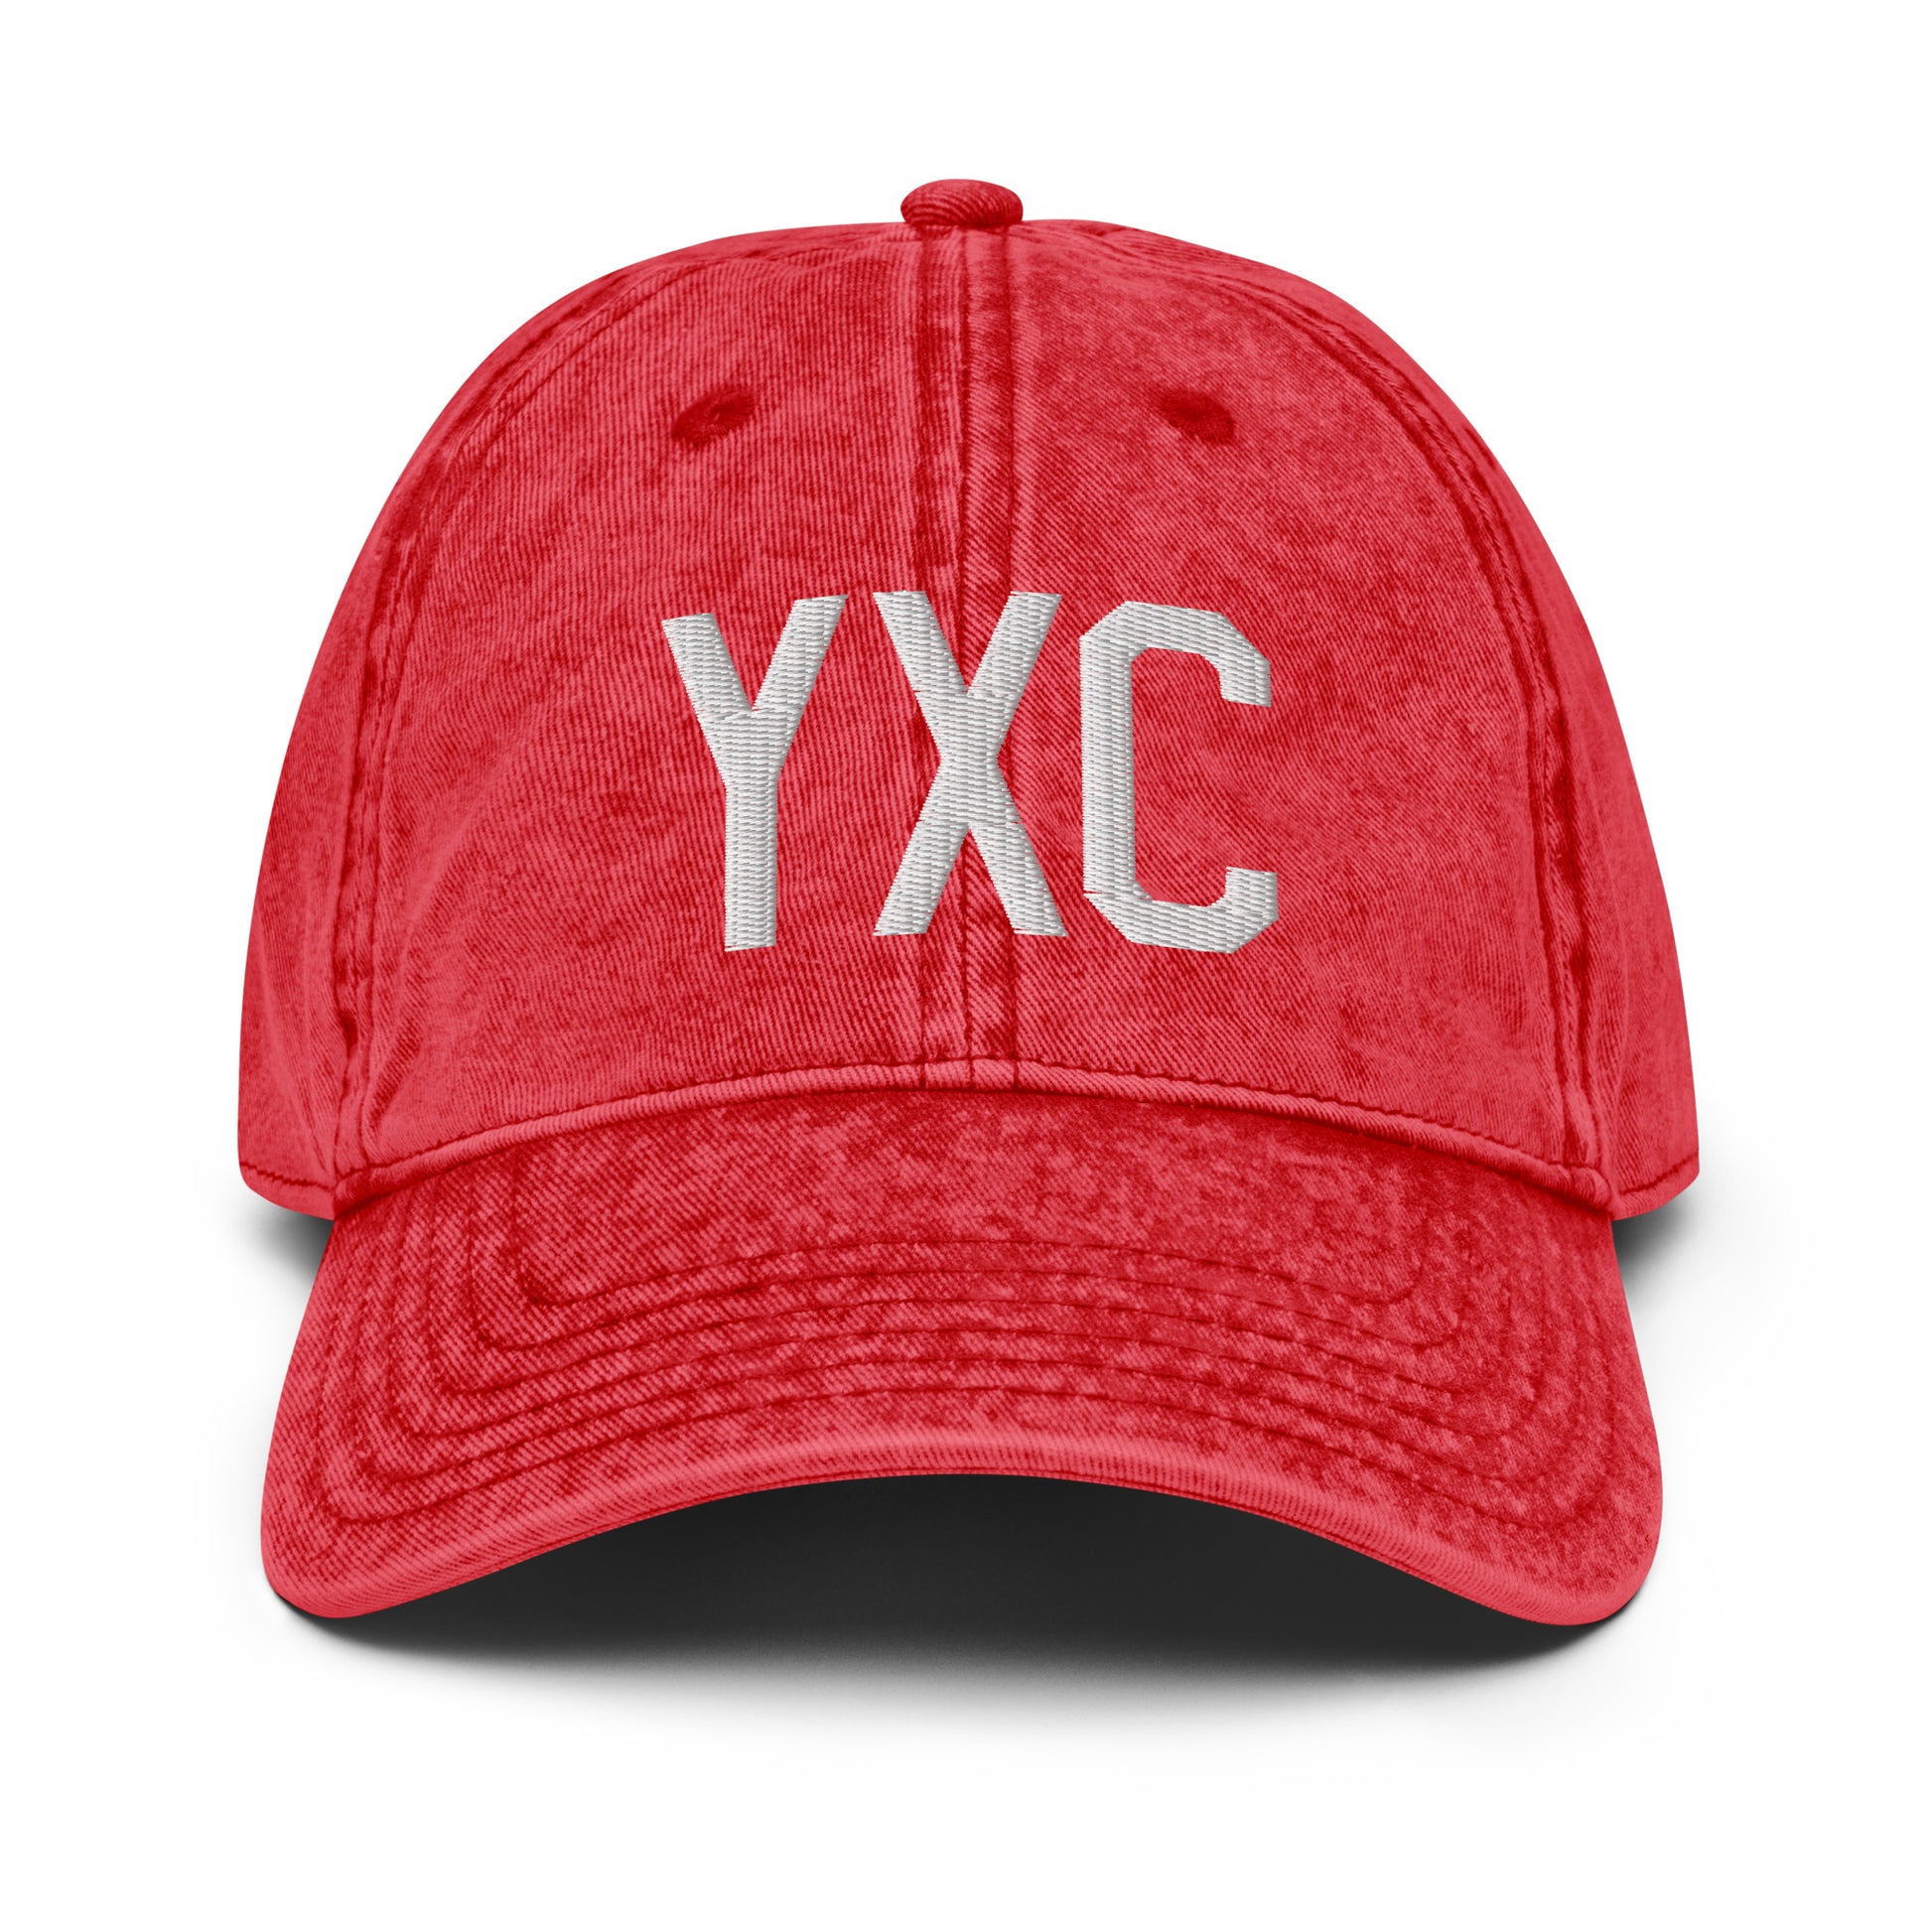 Airport Code Twill Cap - White • YXC Cranbrook • YHM Designs - Image 22